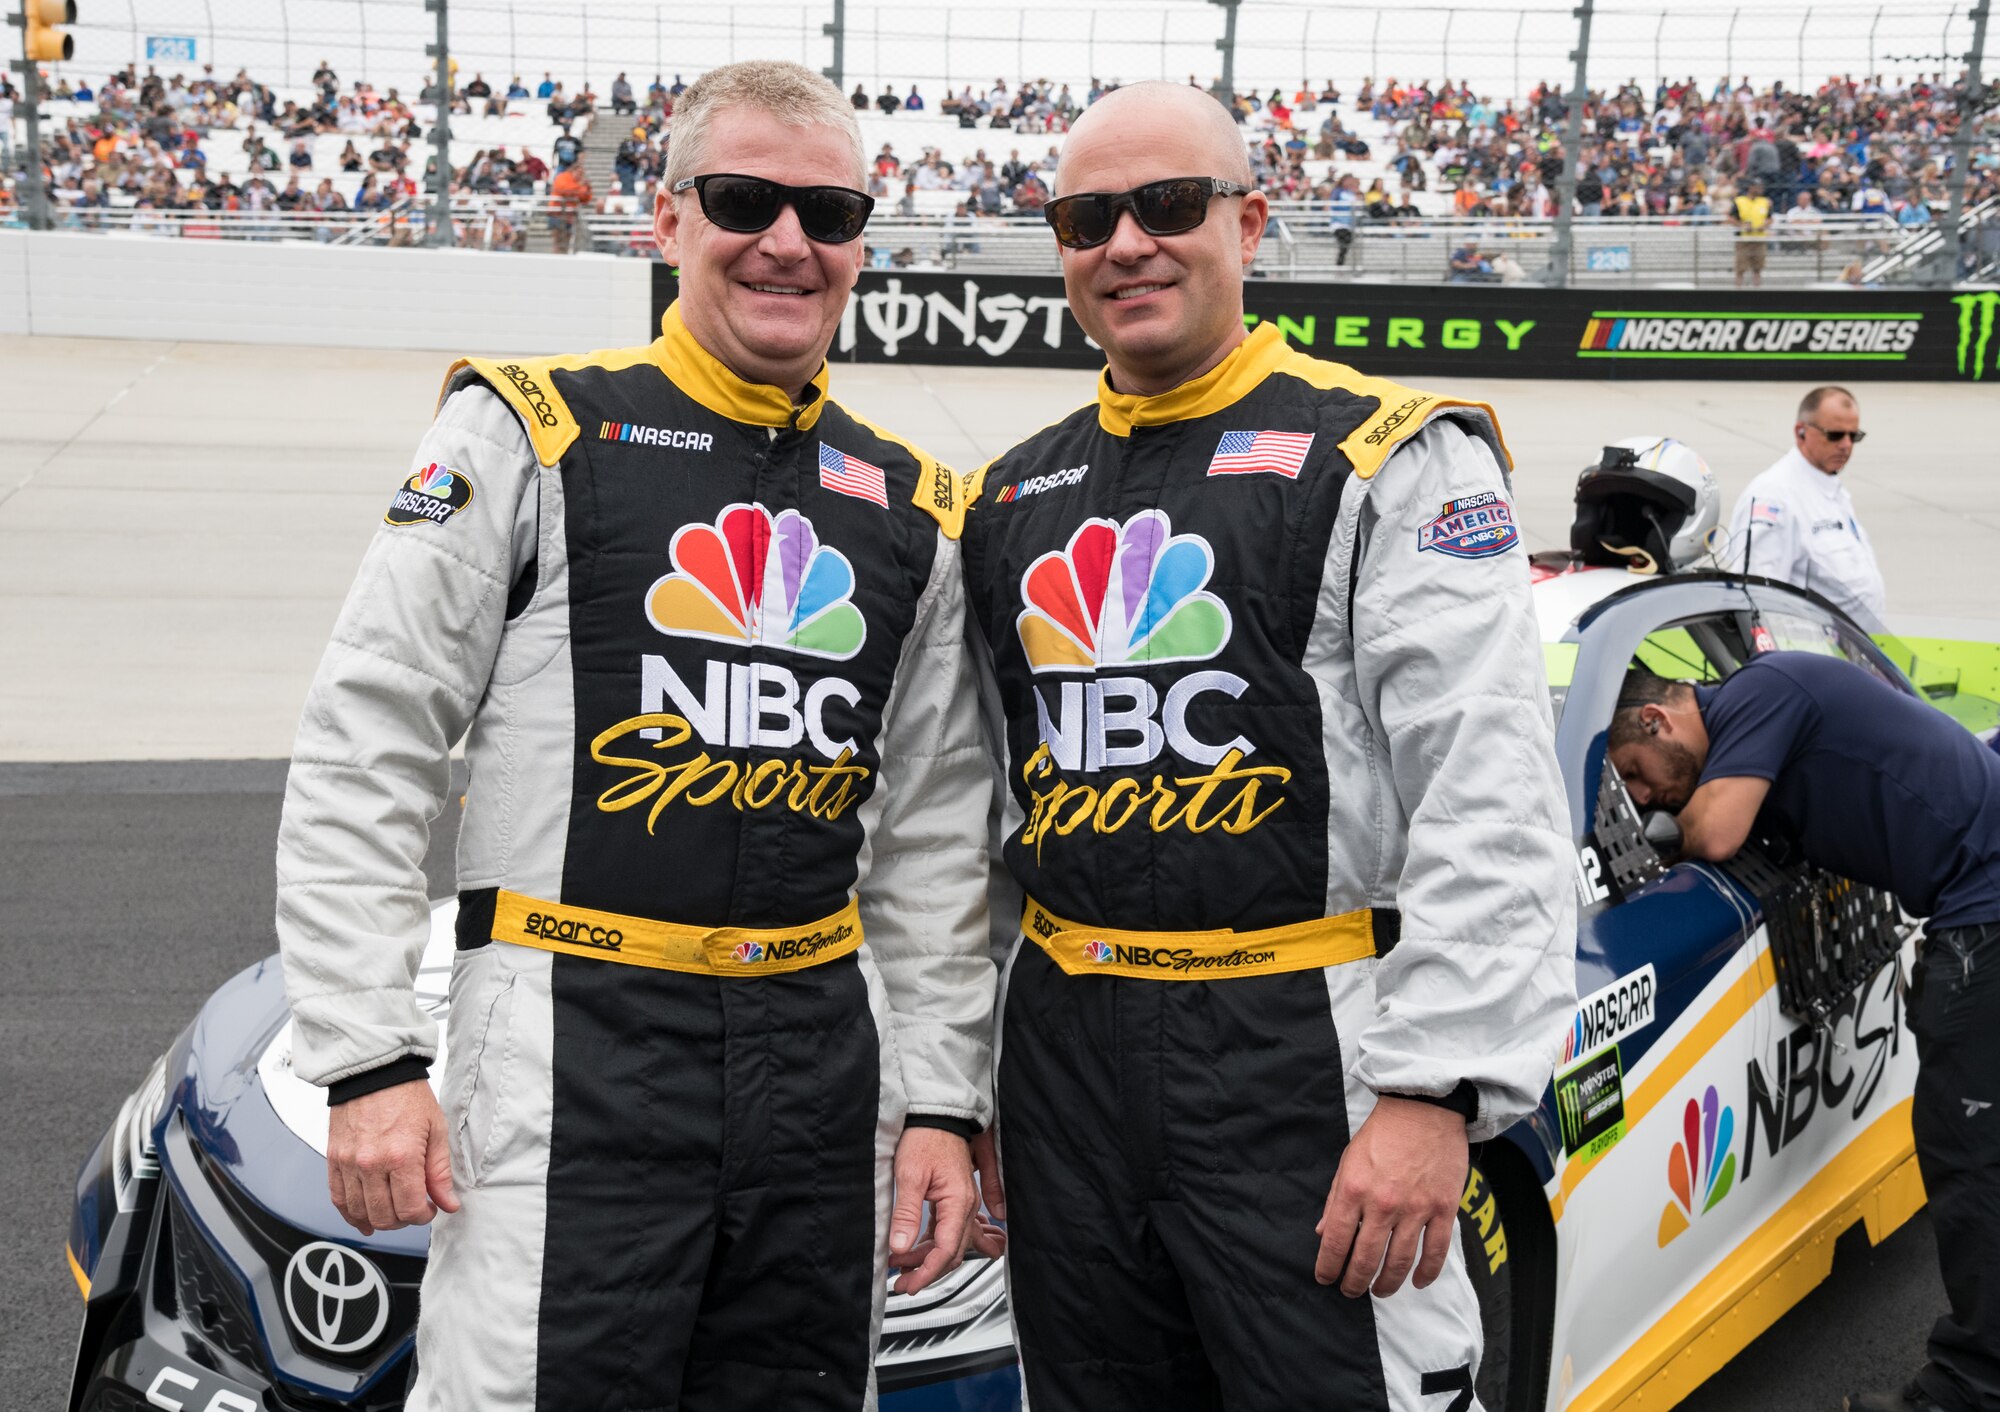 Jeff Burton, left, NBC Sports Group’s NASCAR Cup analyst, and Master Sgt. Chad Huggins, 436th Aerial Port Squadron combat readiness and resources section chief, pose for a photo Oct. 6, 2019, at Dover International Speedway, Dover, Del. Burton took Huggins for a “joy ride” in the NBC car at full speed around the Monster Mile, which was broadcasted live prior to the start of the “Drydene 400” Monster Energy NASCAR Cup Series playoff race. (U.S. Air Force photo by Roland Balik)